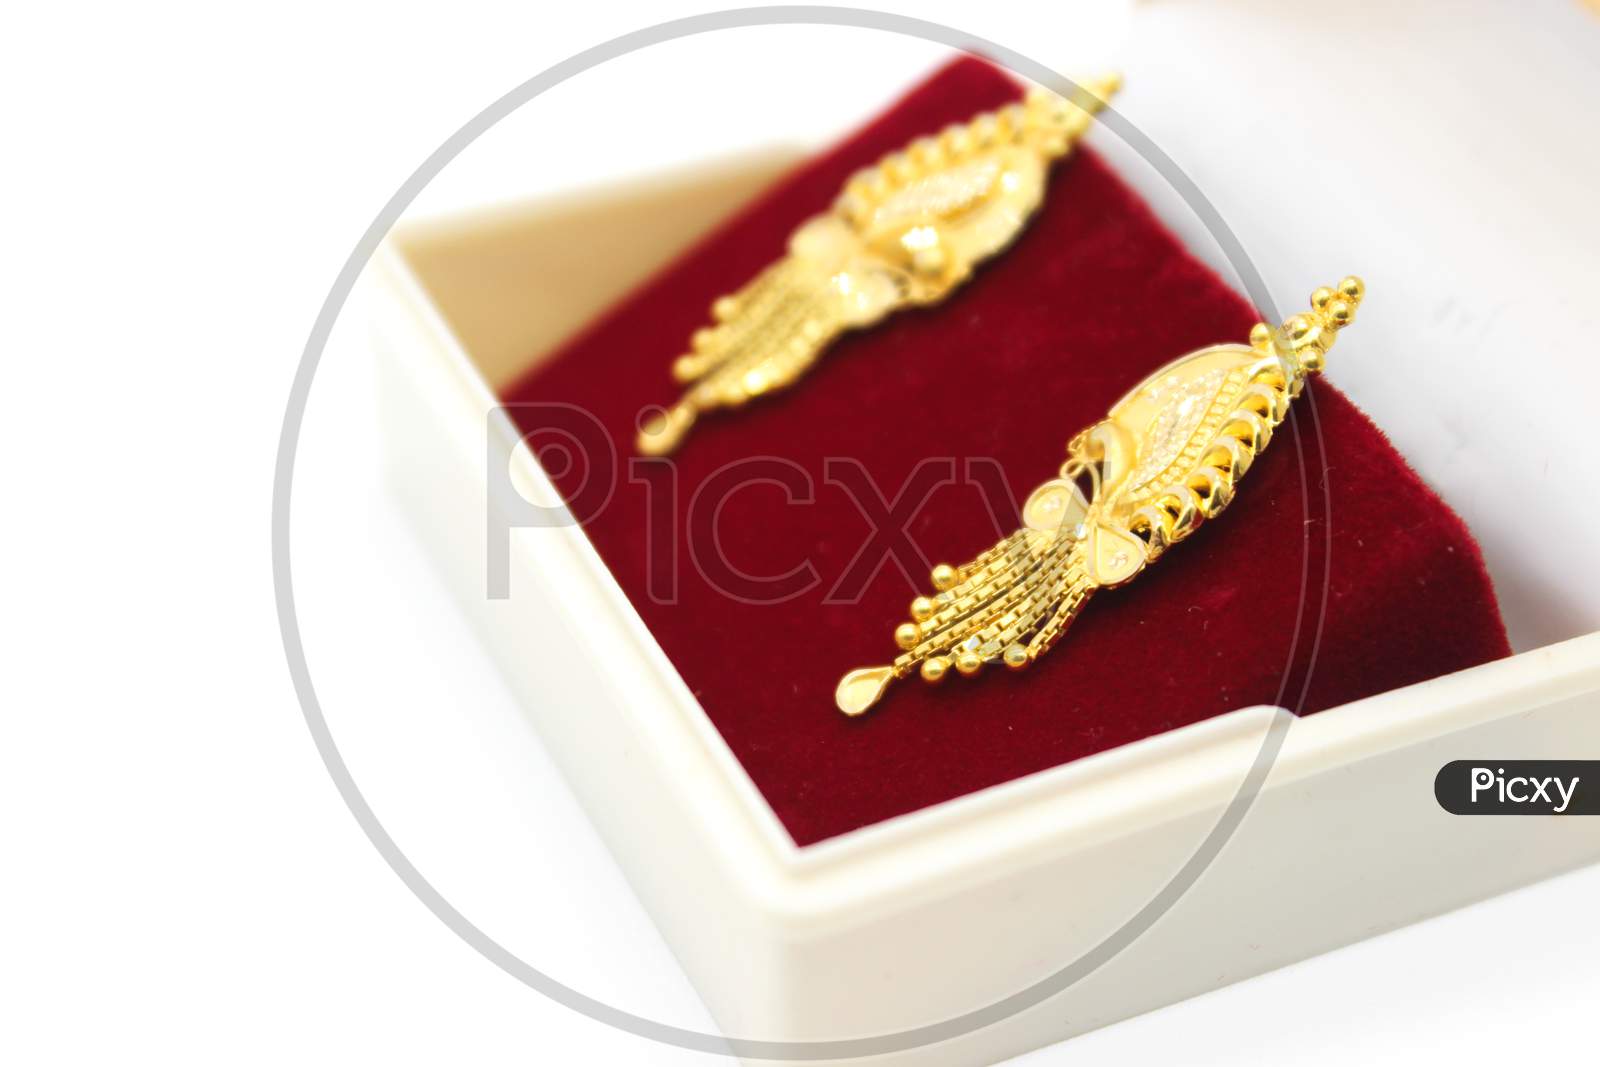 A Picture Of Golden Earrings With Selective Focus